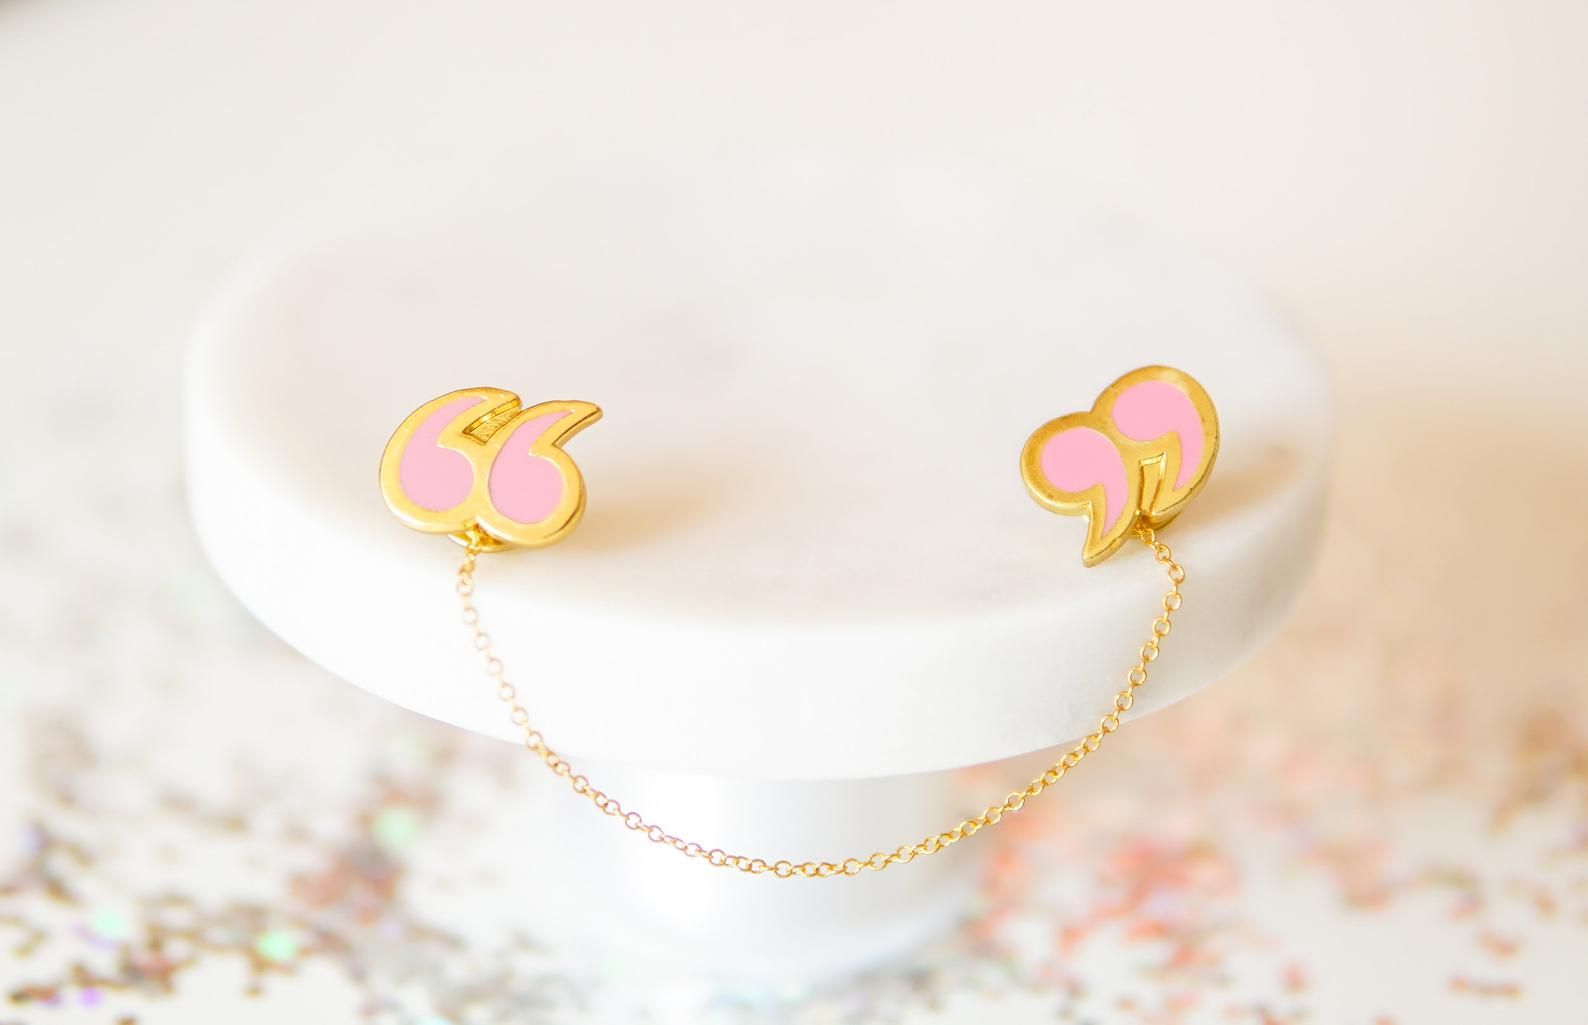 Two pink and gold quotation mark pins, linked by a gold chain. They are resting on a white stand.